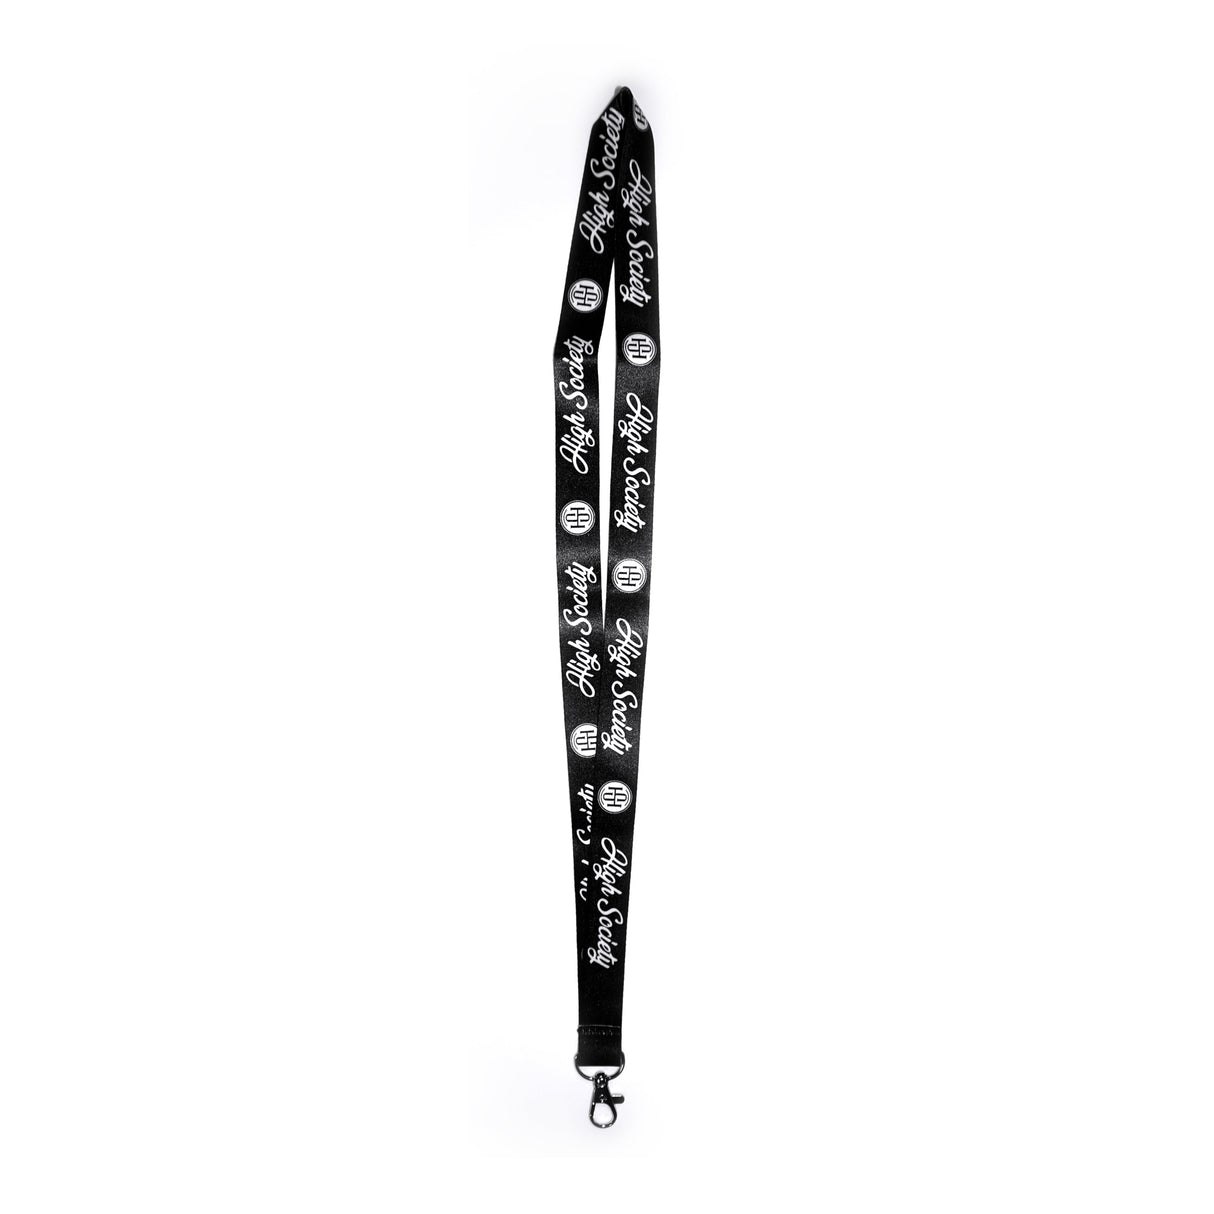 High Society Limited Edition Lanyard in black with logo print, front view on white background